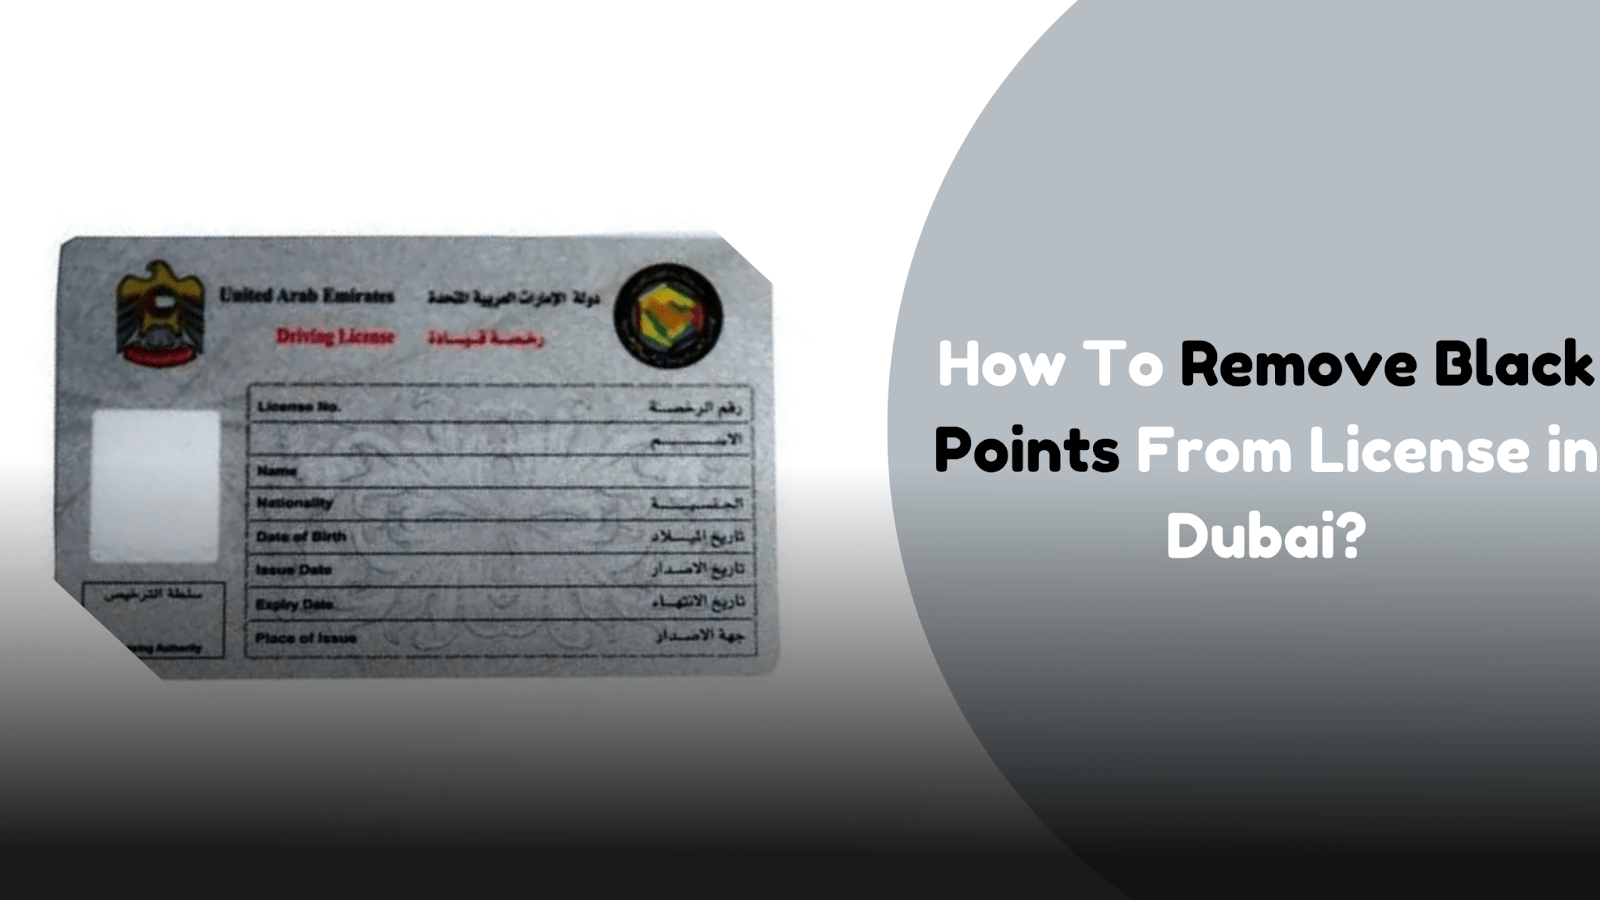 How To Remove Black Points From License in Dubai?